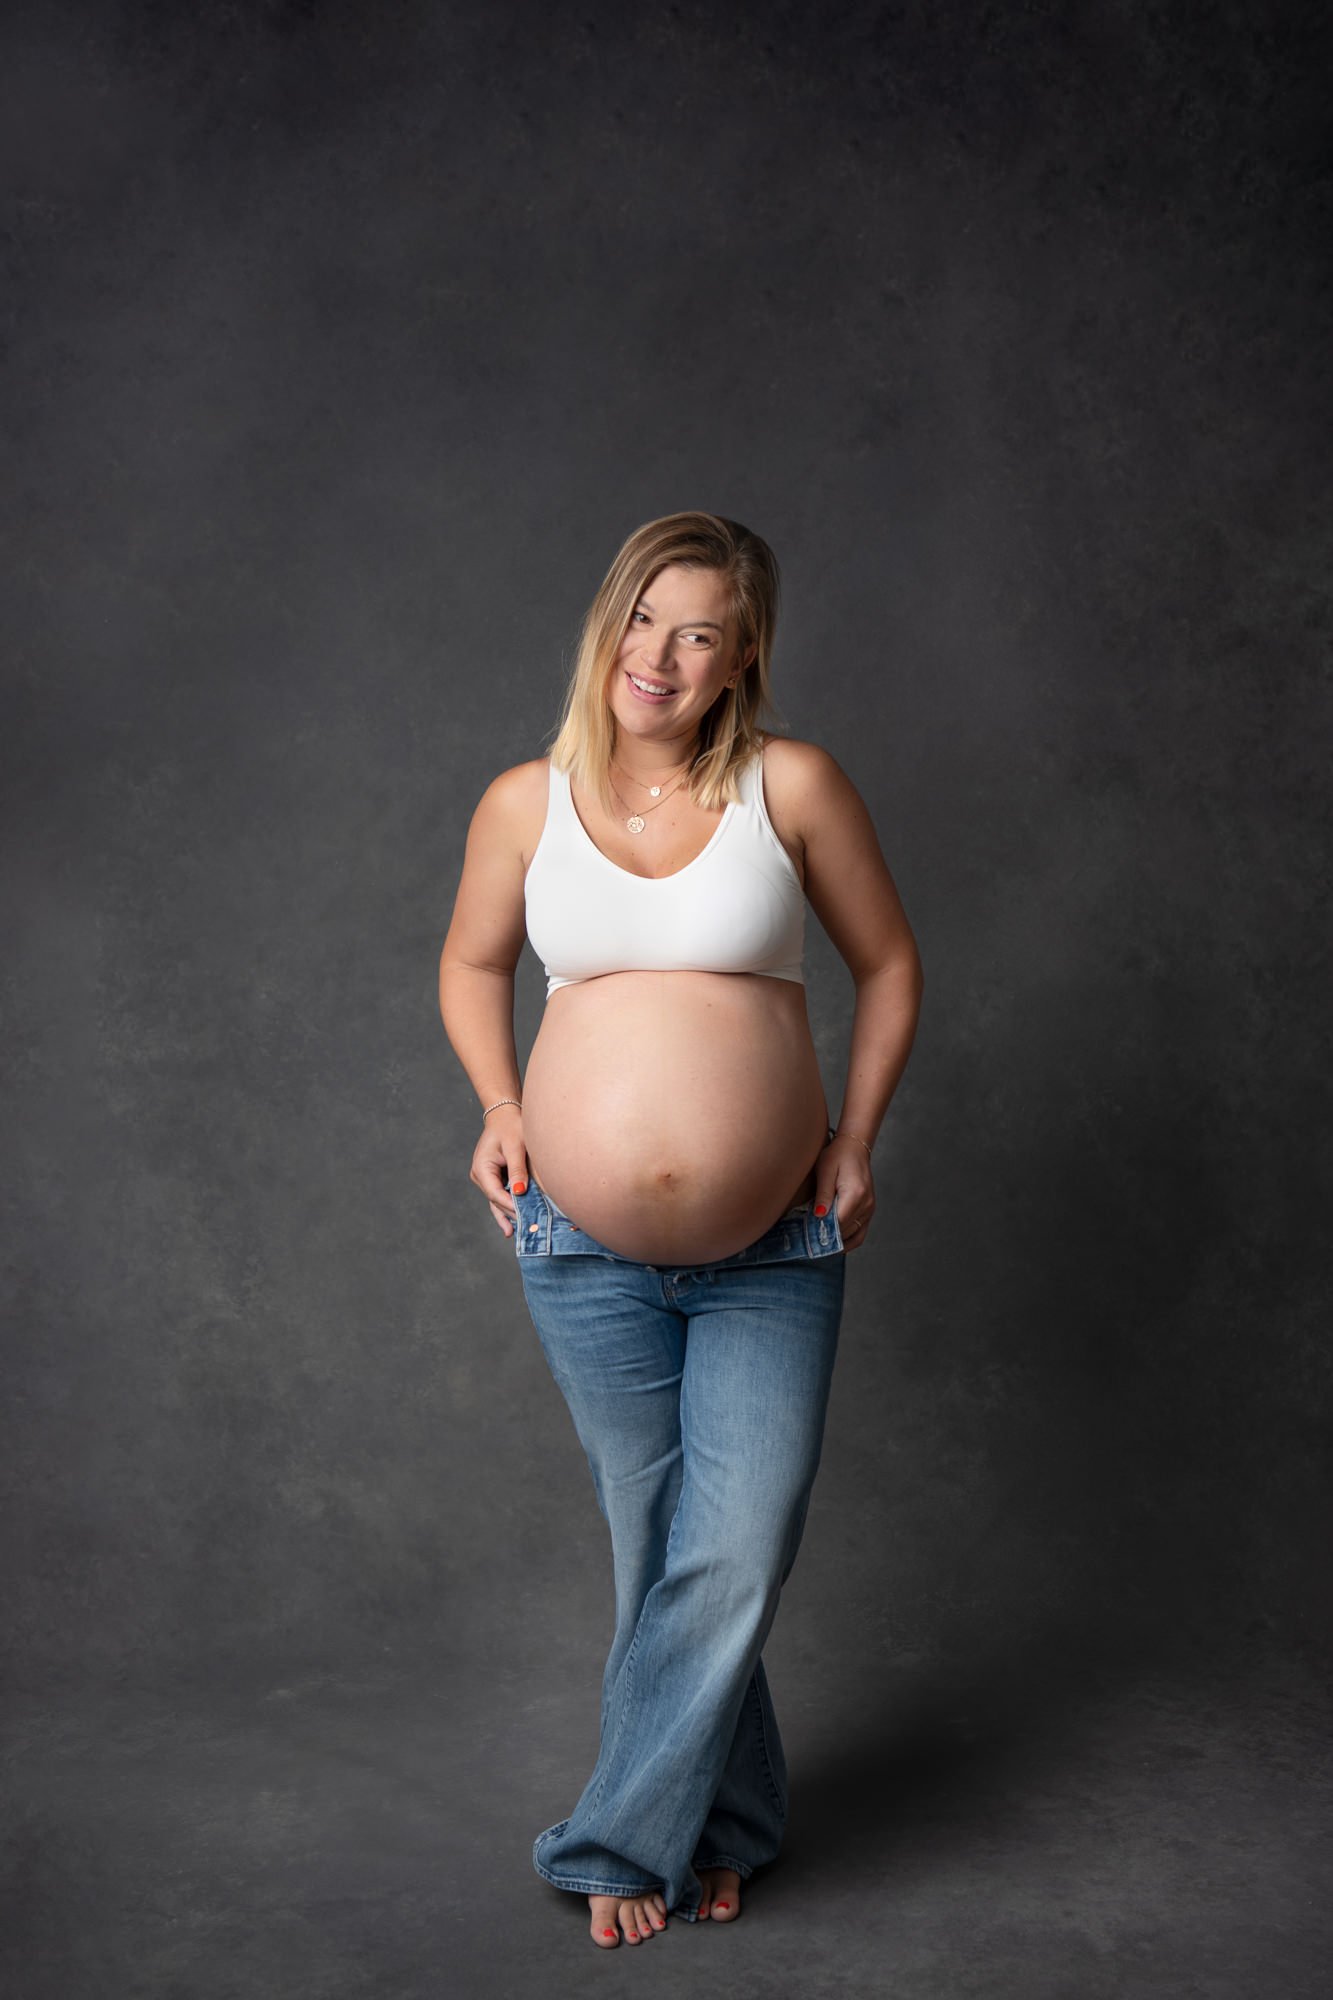   Mom-to-be posing during maternity photoshoot, wearing jeans and a white top. Pregnancy photo pose ideas Maternity portrait ideas #EssexCountyFamilyPhotographer #BergenCountyFamilyPhotographer #NorthernNewJerseyFamilyPhotographer #NorthernNewJerseyP